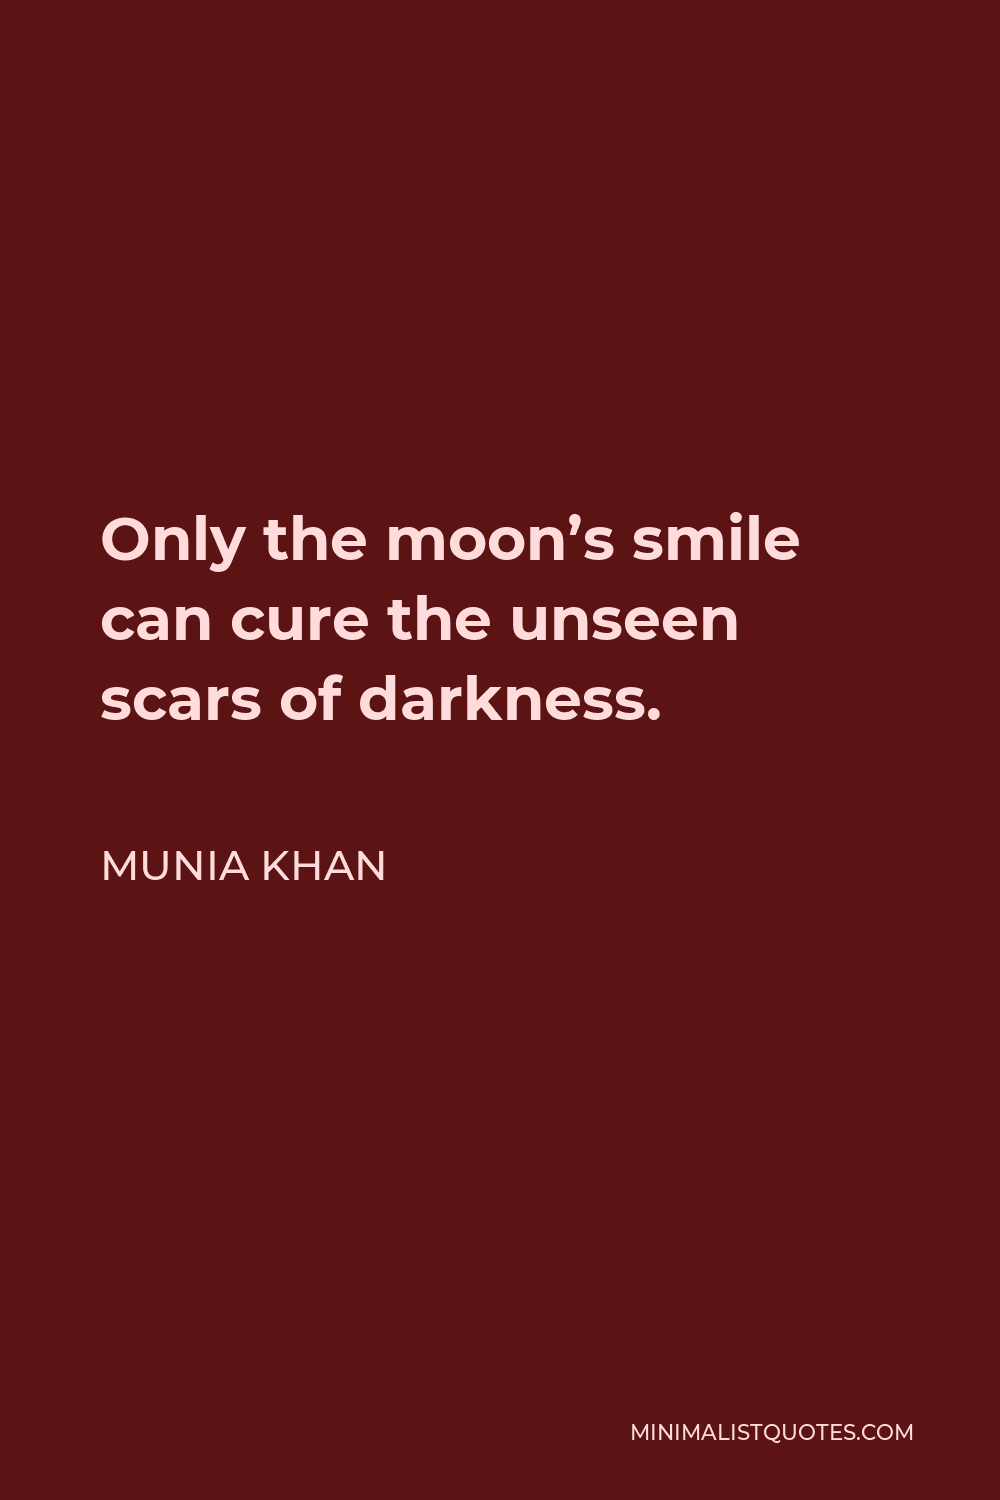 Munia Khan Quote - Only the moon’s smile can cure the unseen scars of darkness.